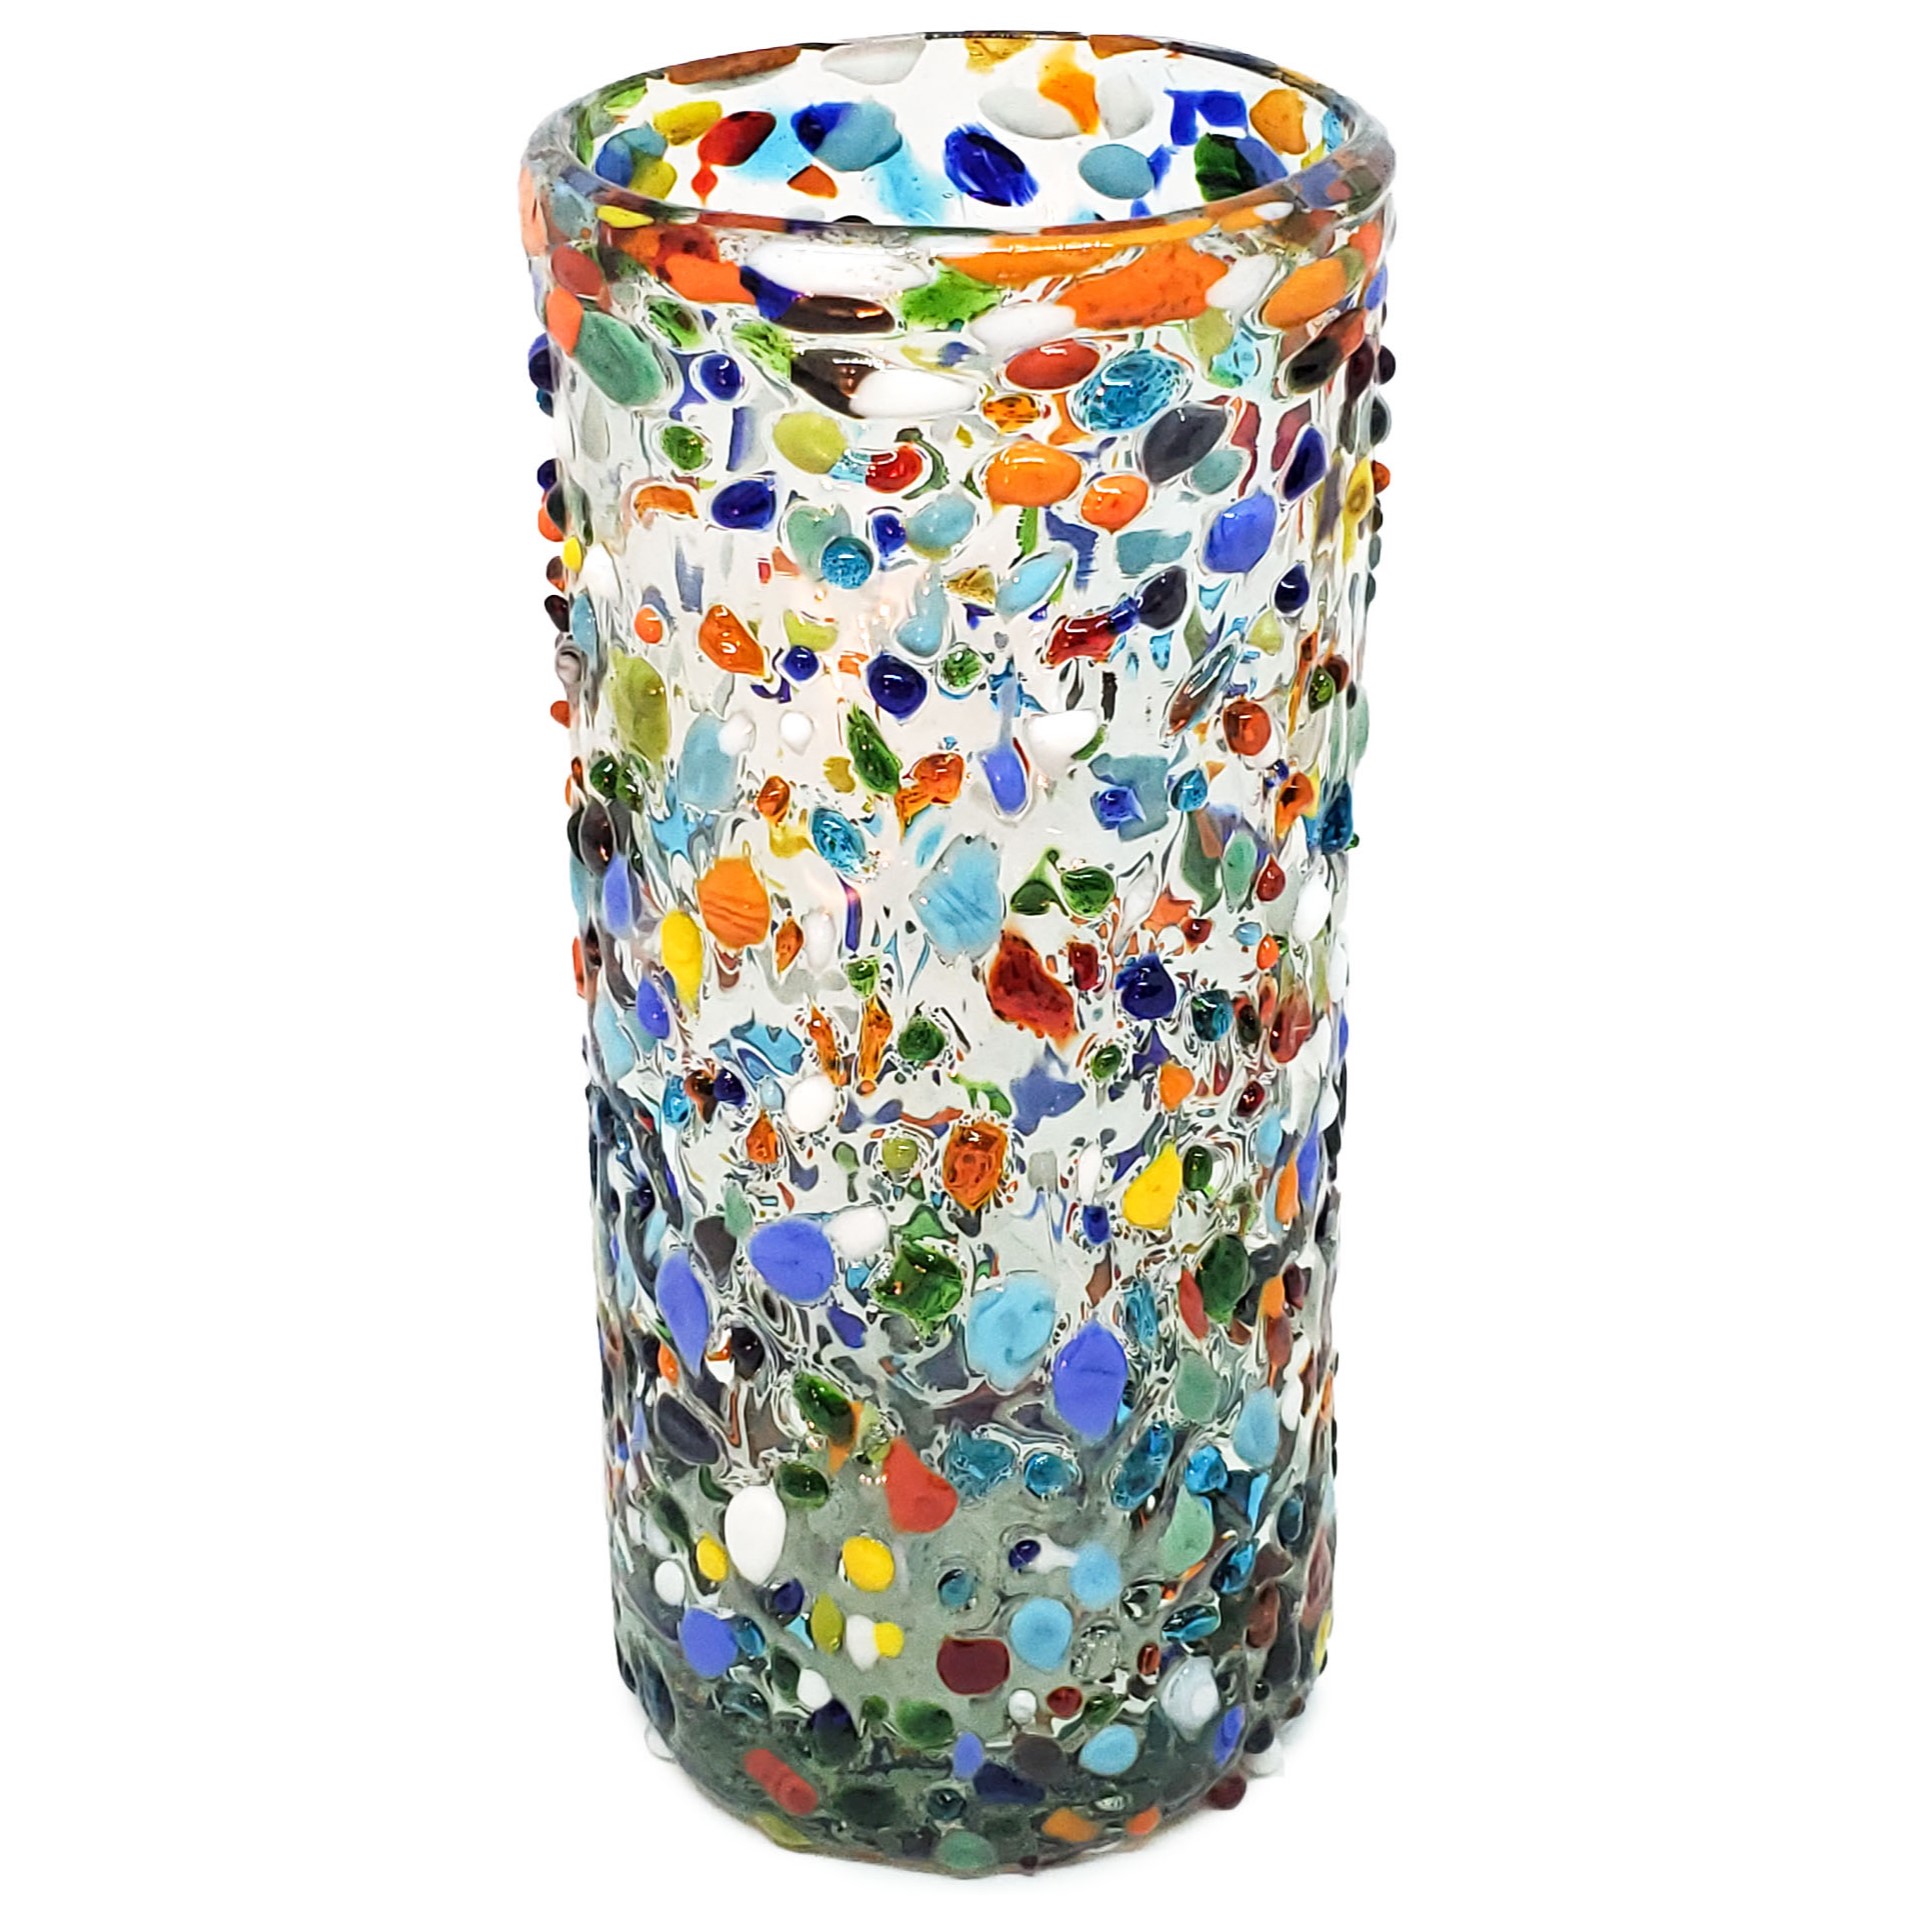 New Items / Confetti Rocks 20 oz Tall Iced Tea Glasses  / Let the spring come into your home with this colorful set of glasses. The multicolor glass rocks decoration makes them a standout in any place.